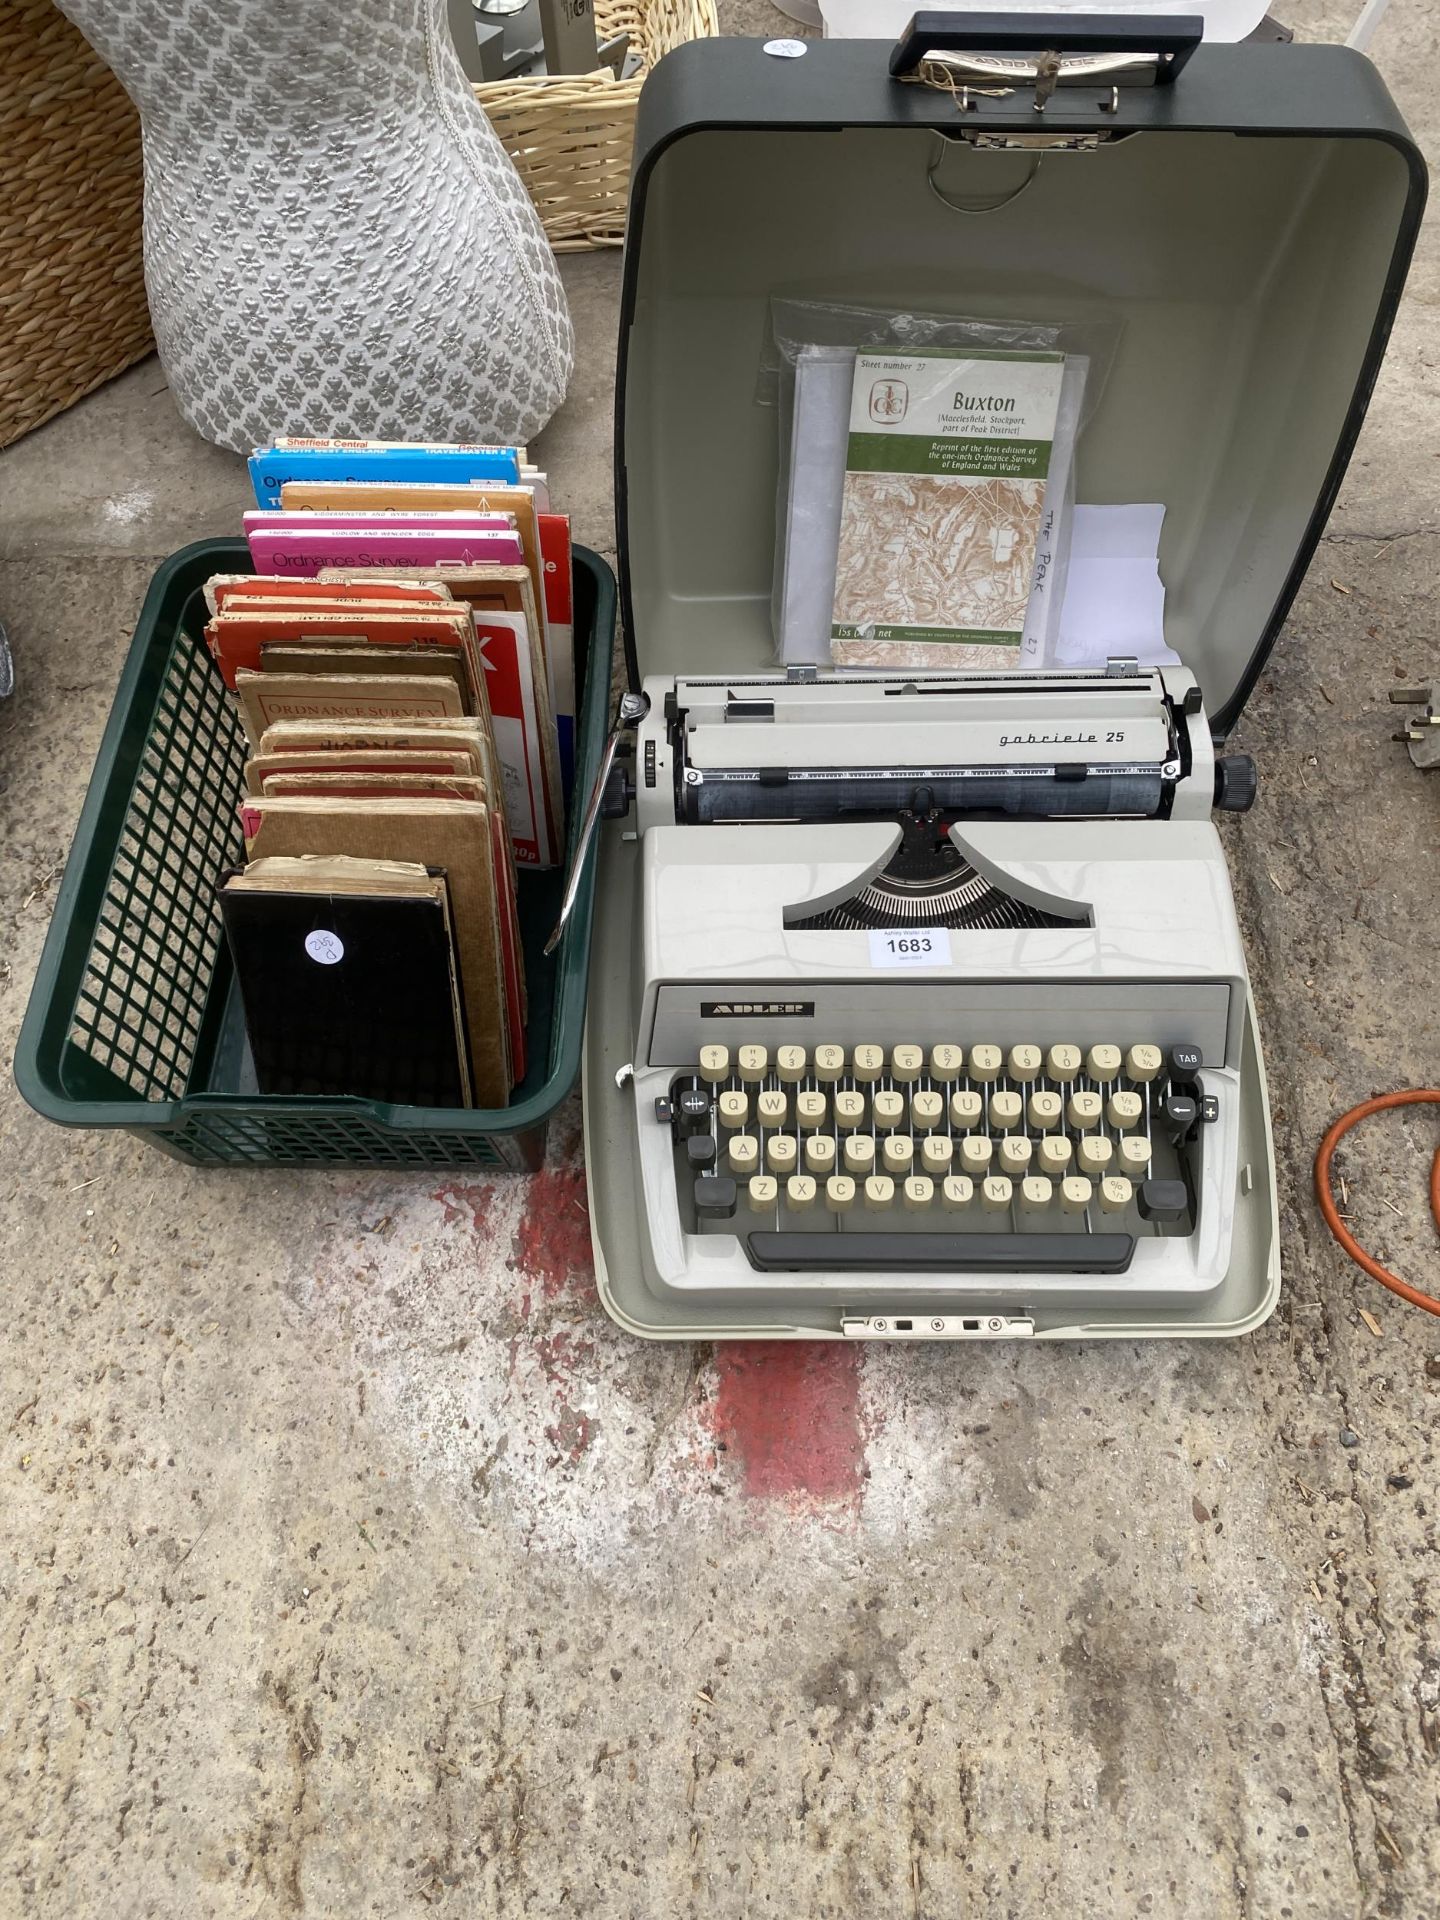 A RETRO GABRIELE 25 TYPEWRITER AND AN ASSORTMENT OF MAPS